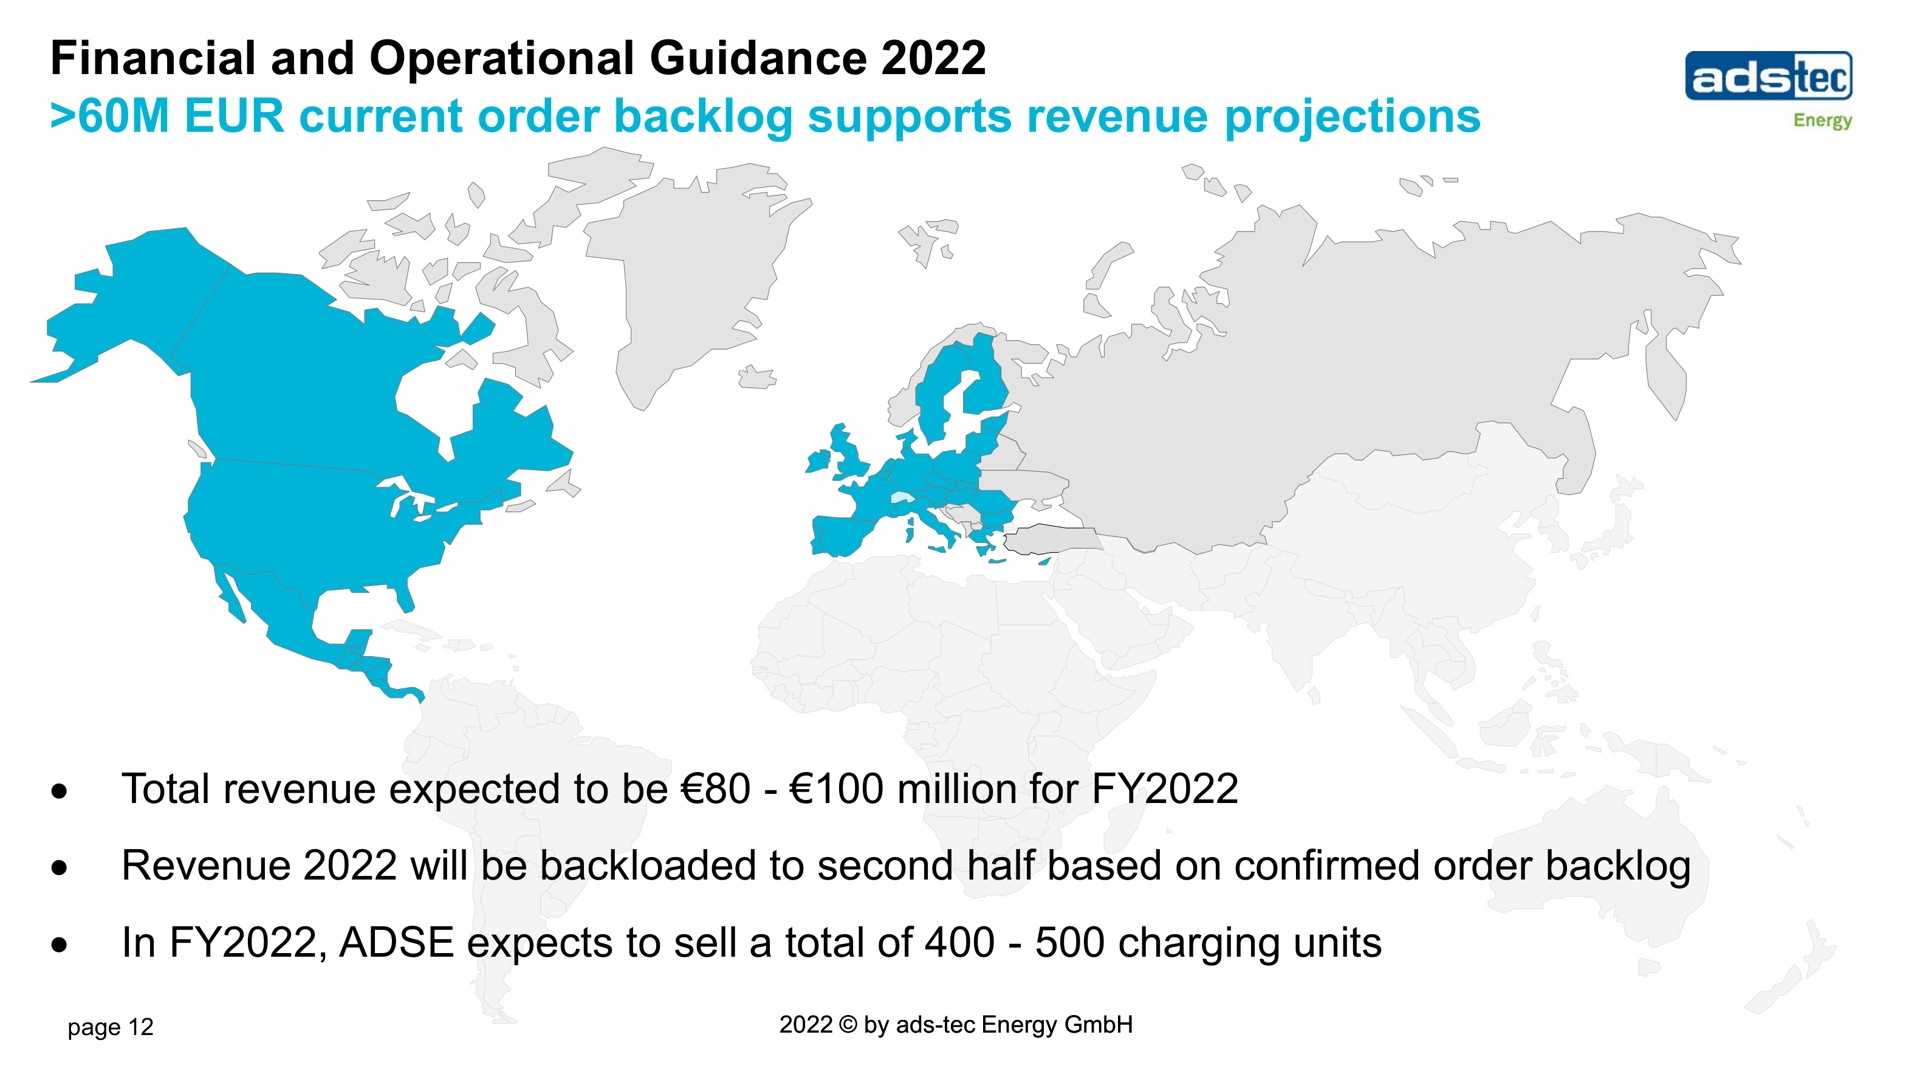 financial and operational guidance current order backlog supports revenue projections energy total expected to be million for will be to second half based on confirmed in expects to sell a total of charging units | ads-tec Energy